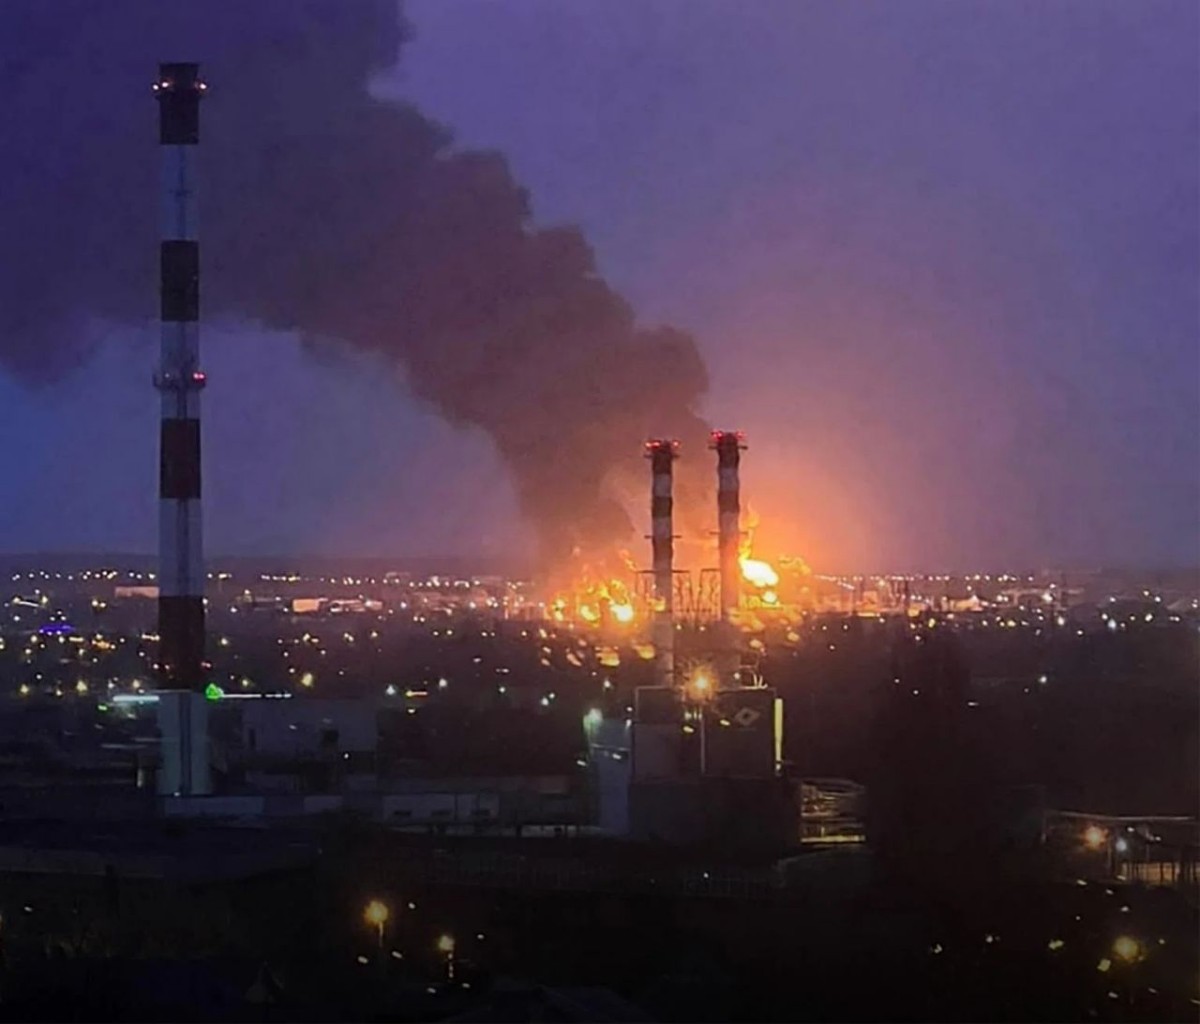 Ukraine Accused Of Revenge Airstrike On A Major Russian Fuel Depot